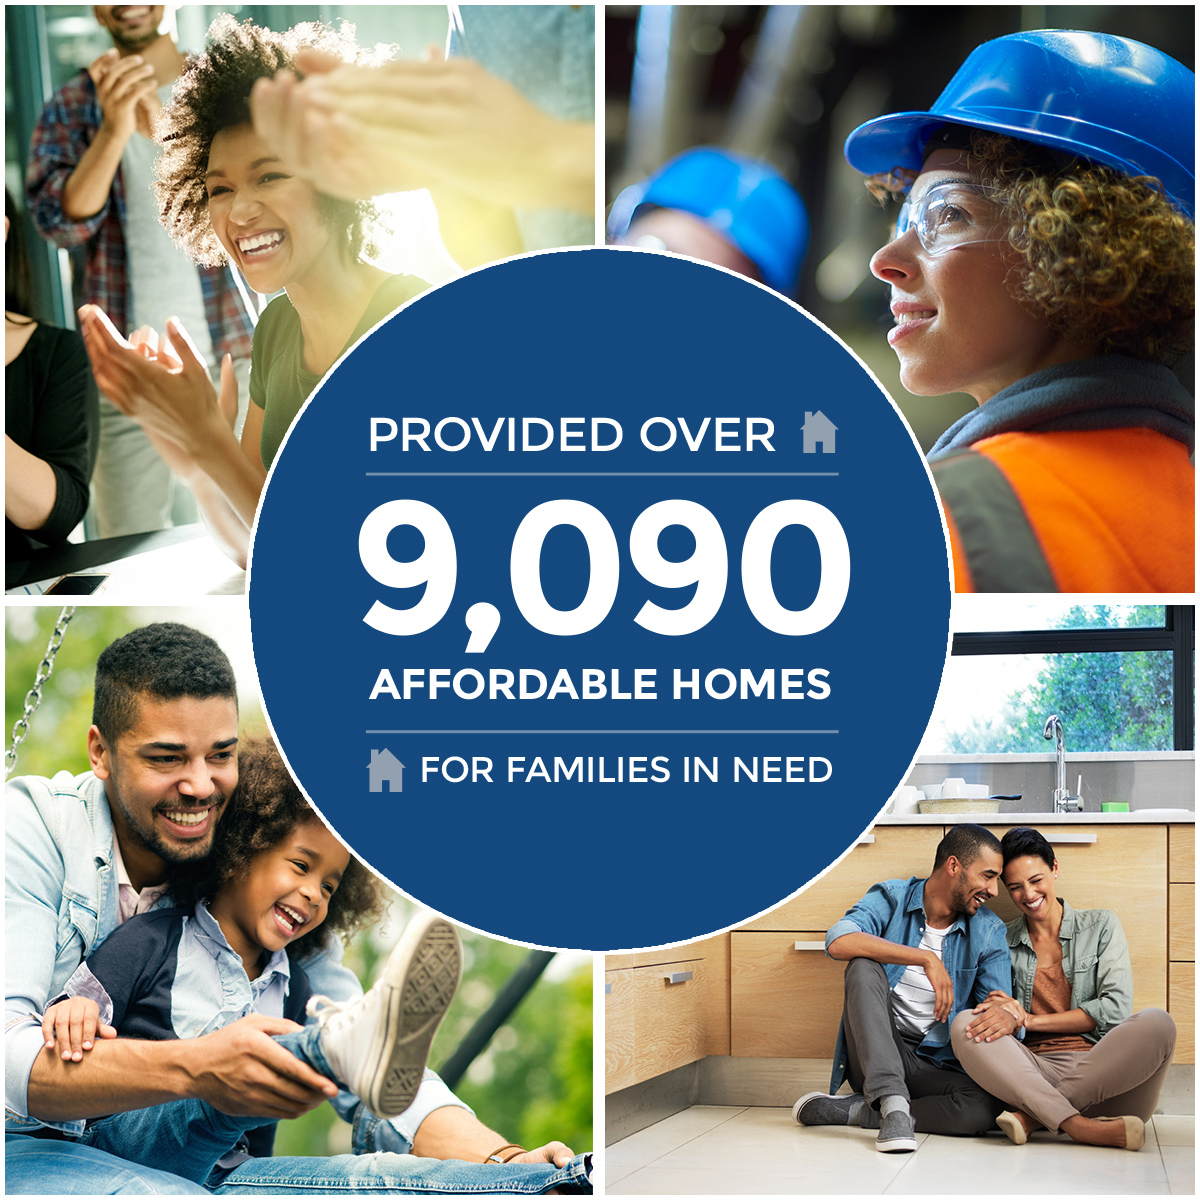 Provided over 9090 affordable homes for families in need.